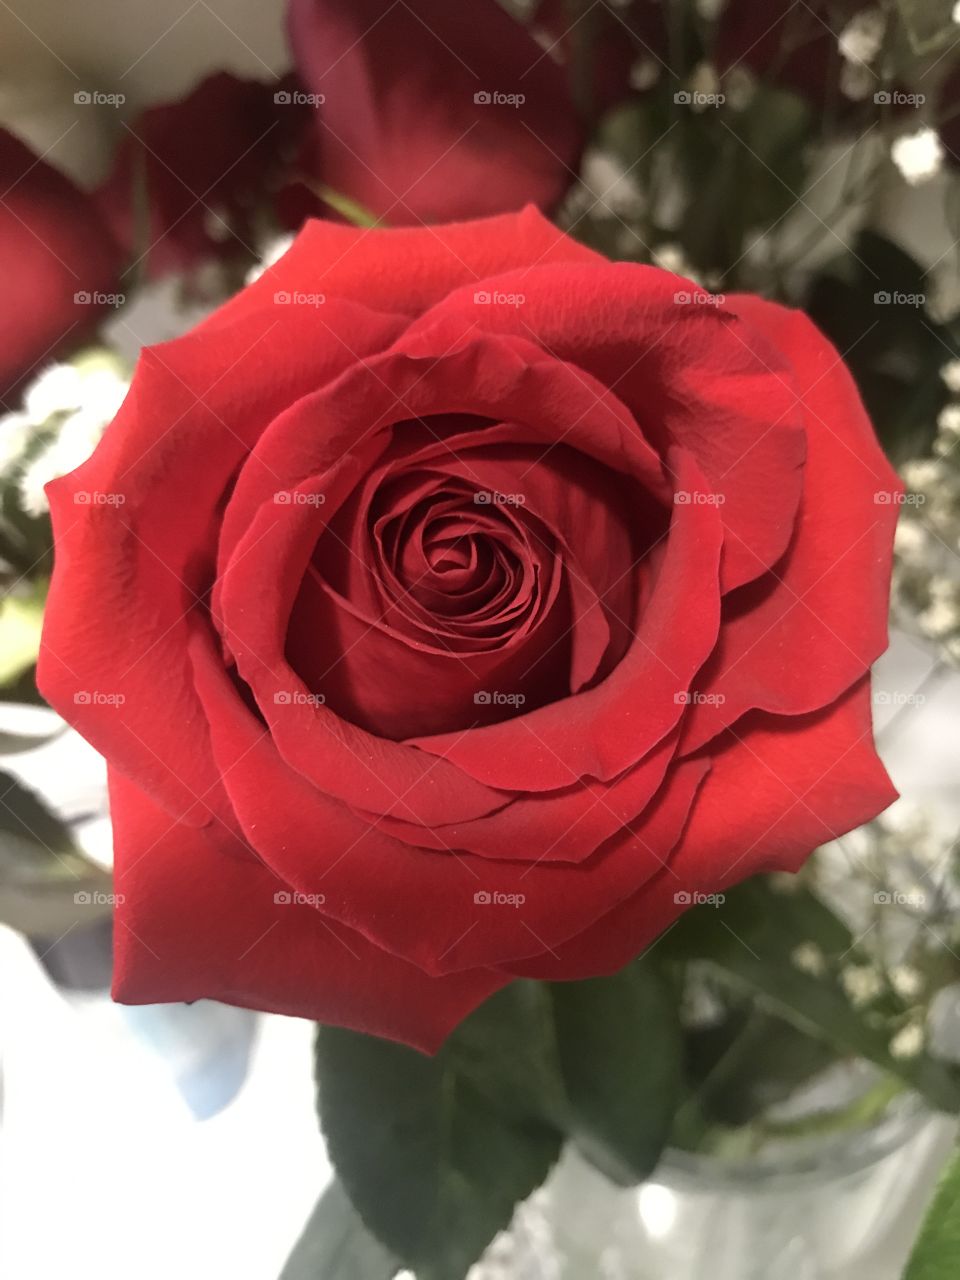 A perfect red rose!